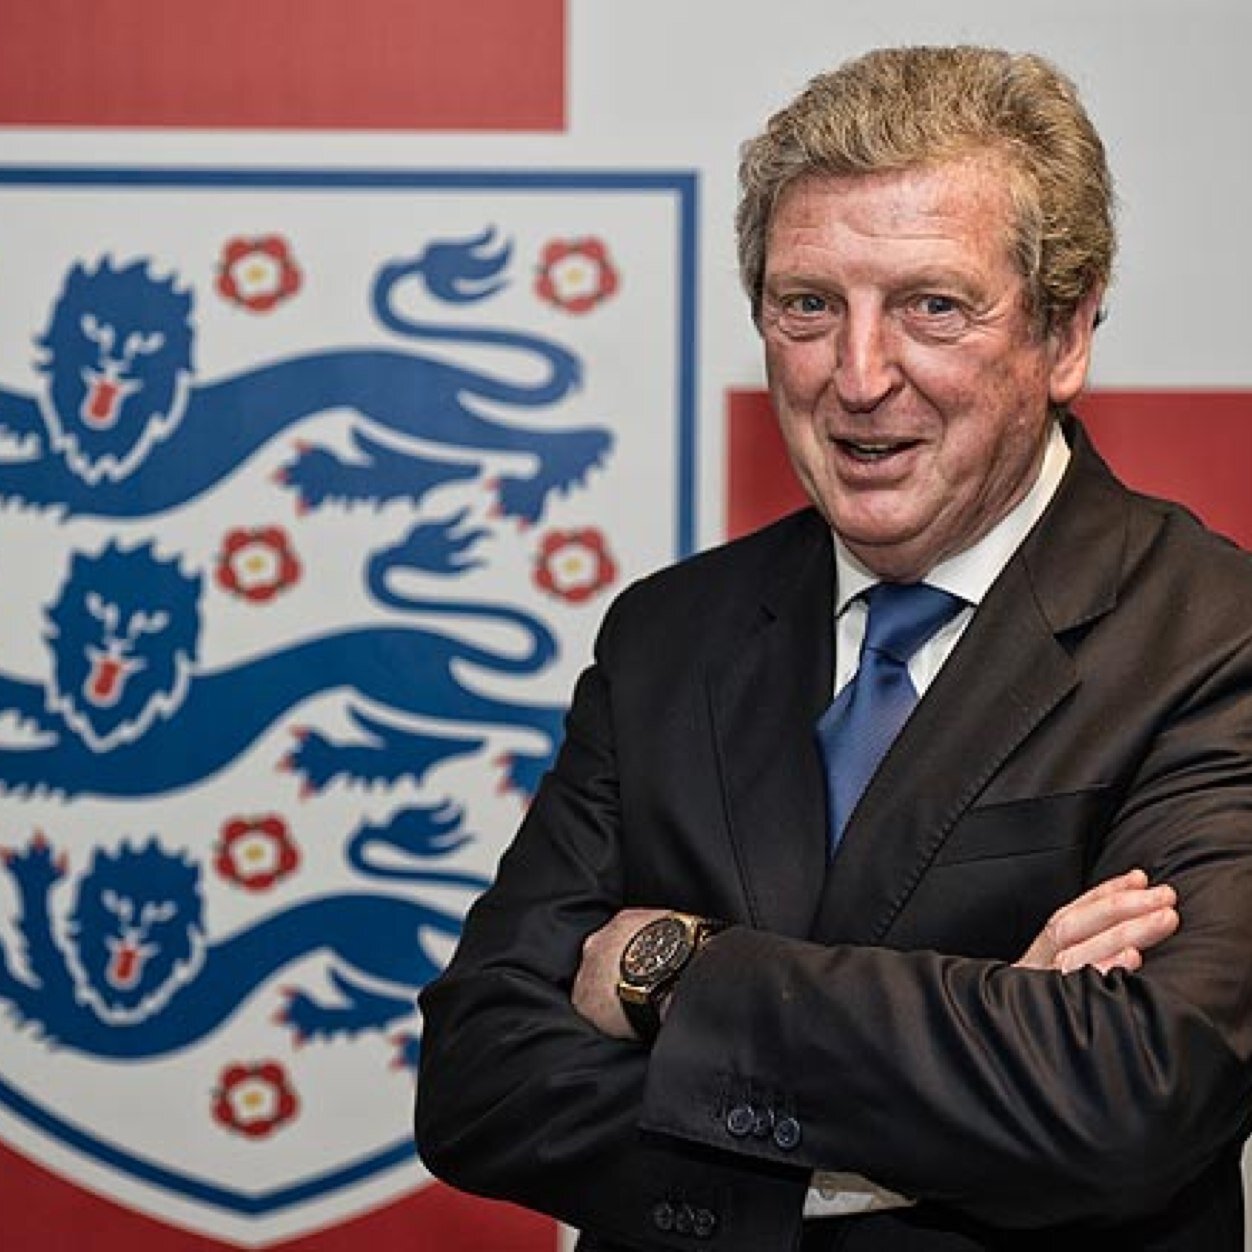 #England Manager, not Wascist. Going to the #WorldCup in #Brazil in 2014! #CPFC #EPL #Croydon
PSN ID - CPFC_Dave